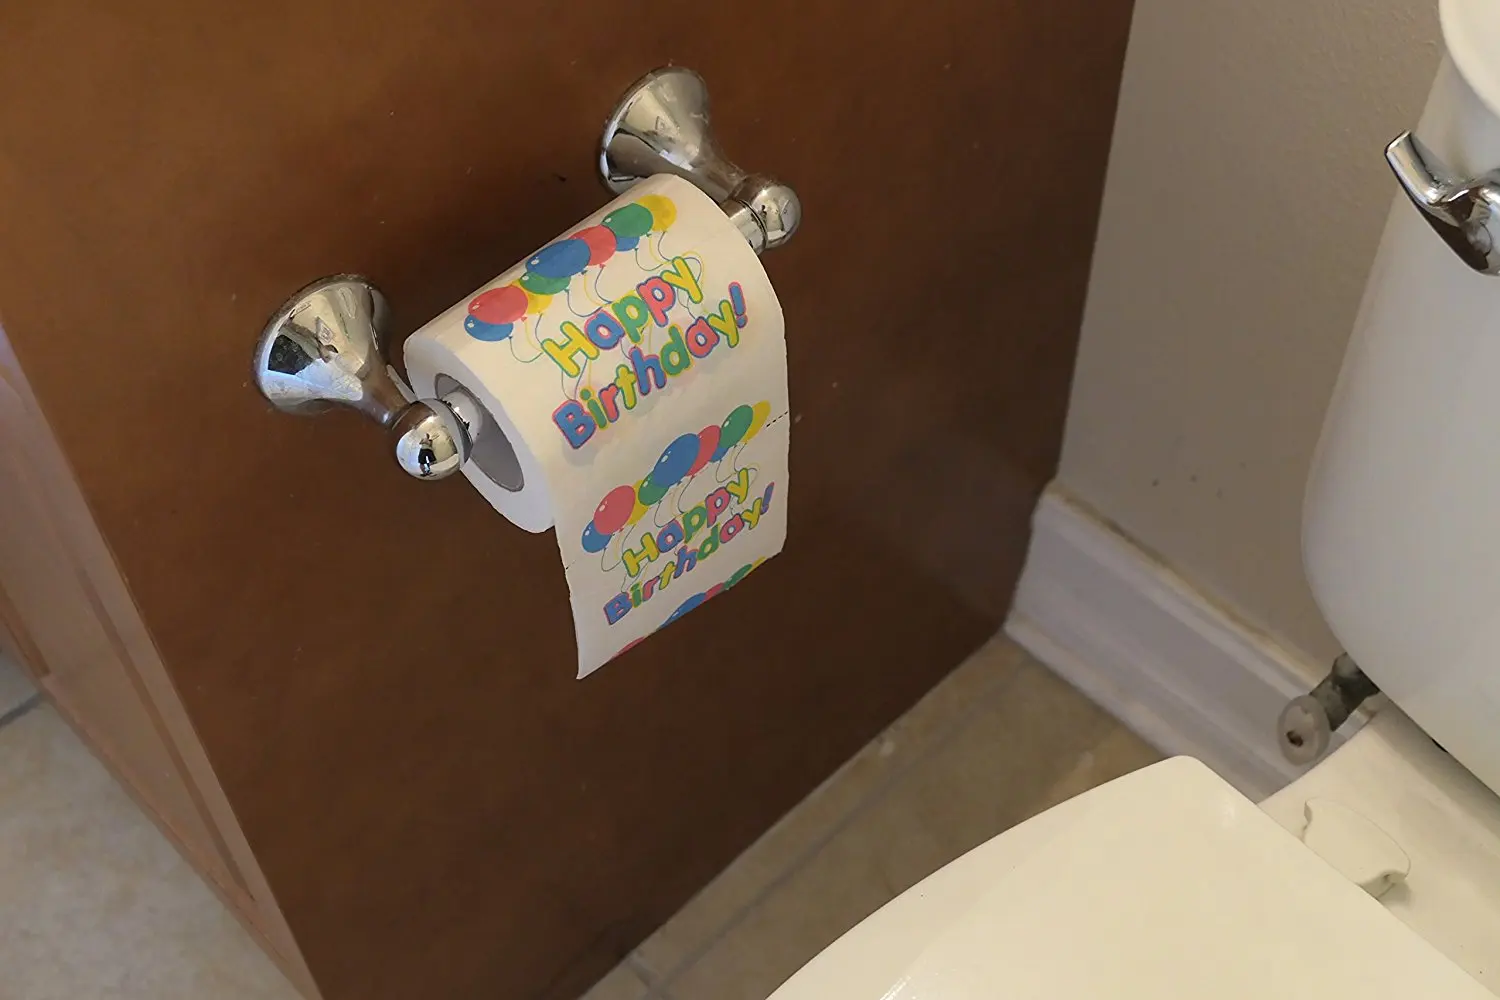 The Gags Happy Birthday Toilet Paper roll is real toilet paper. 